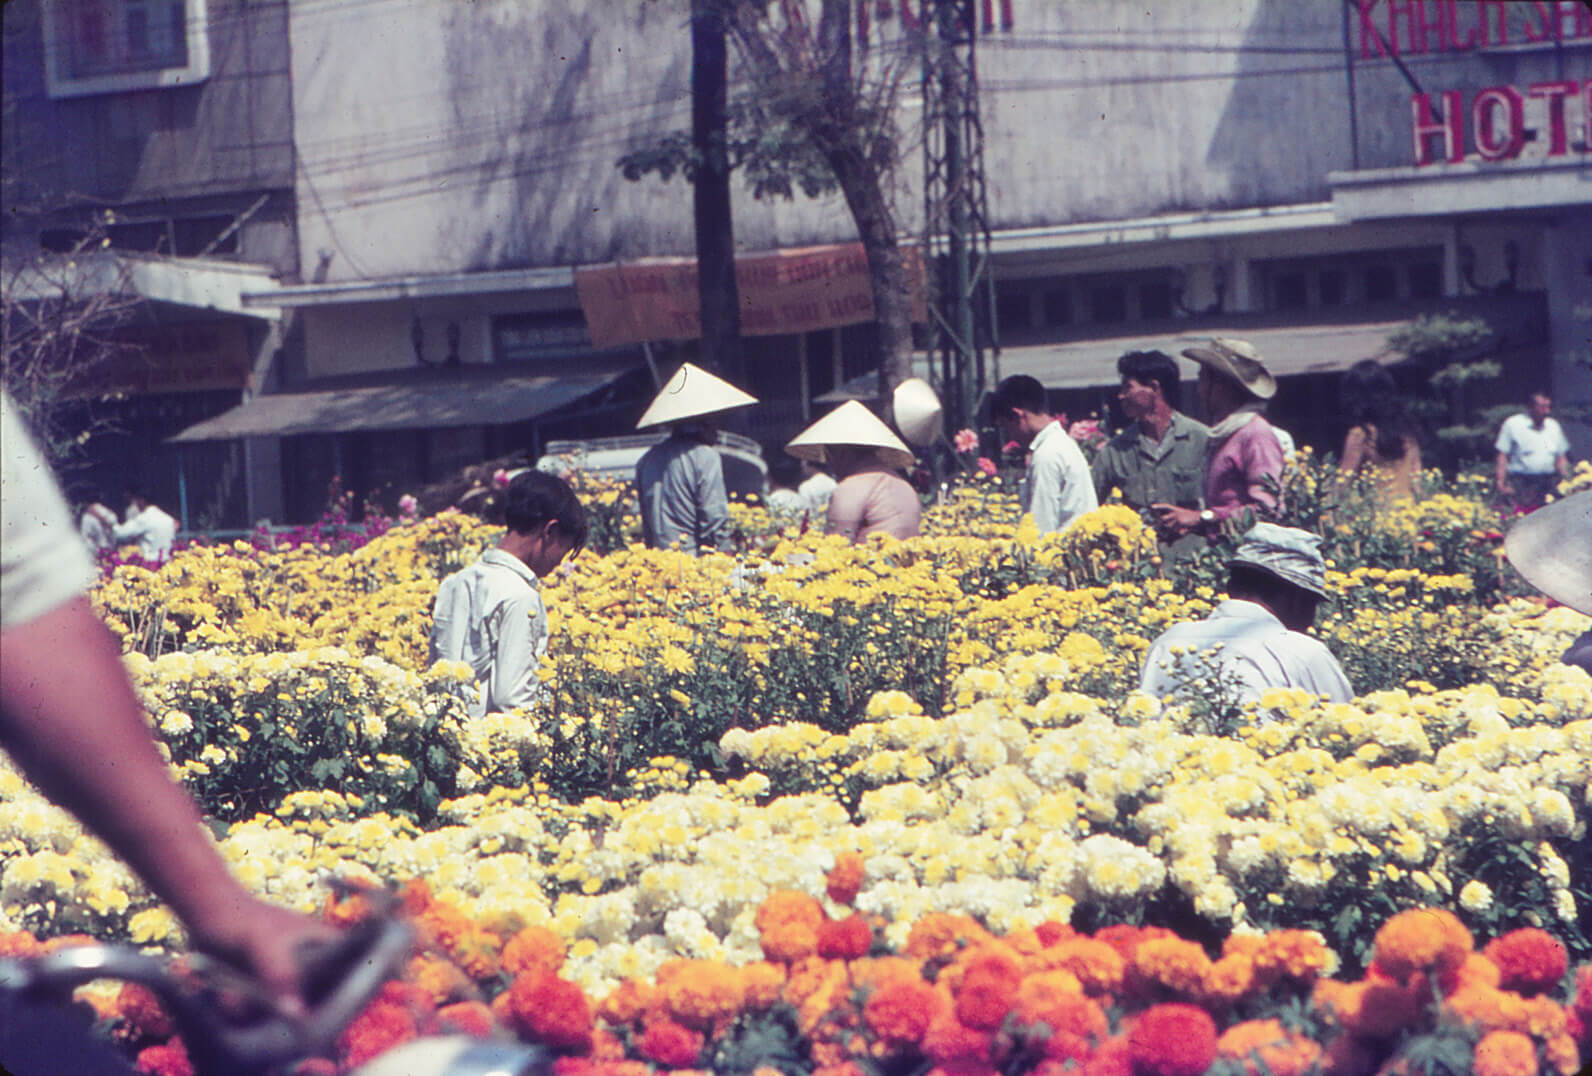 An outdoor marketplace filled with flowers, people in conical straw hats.